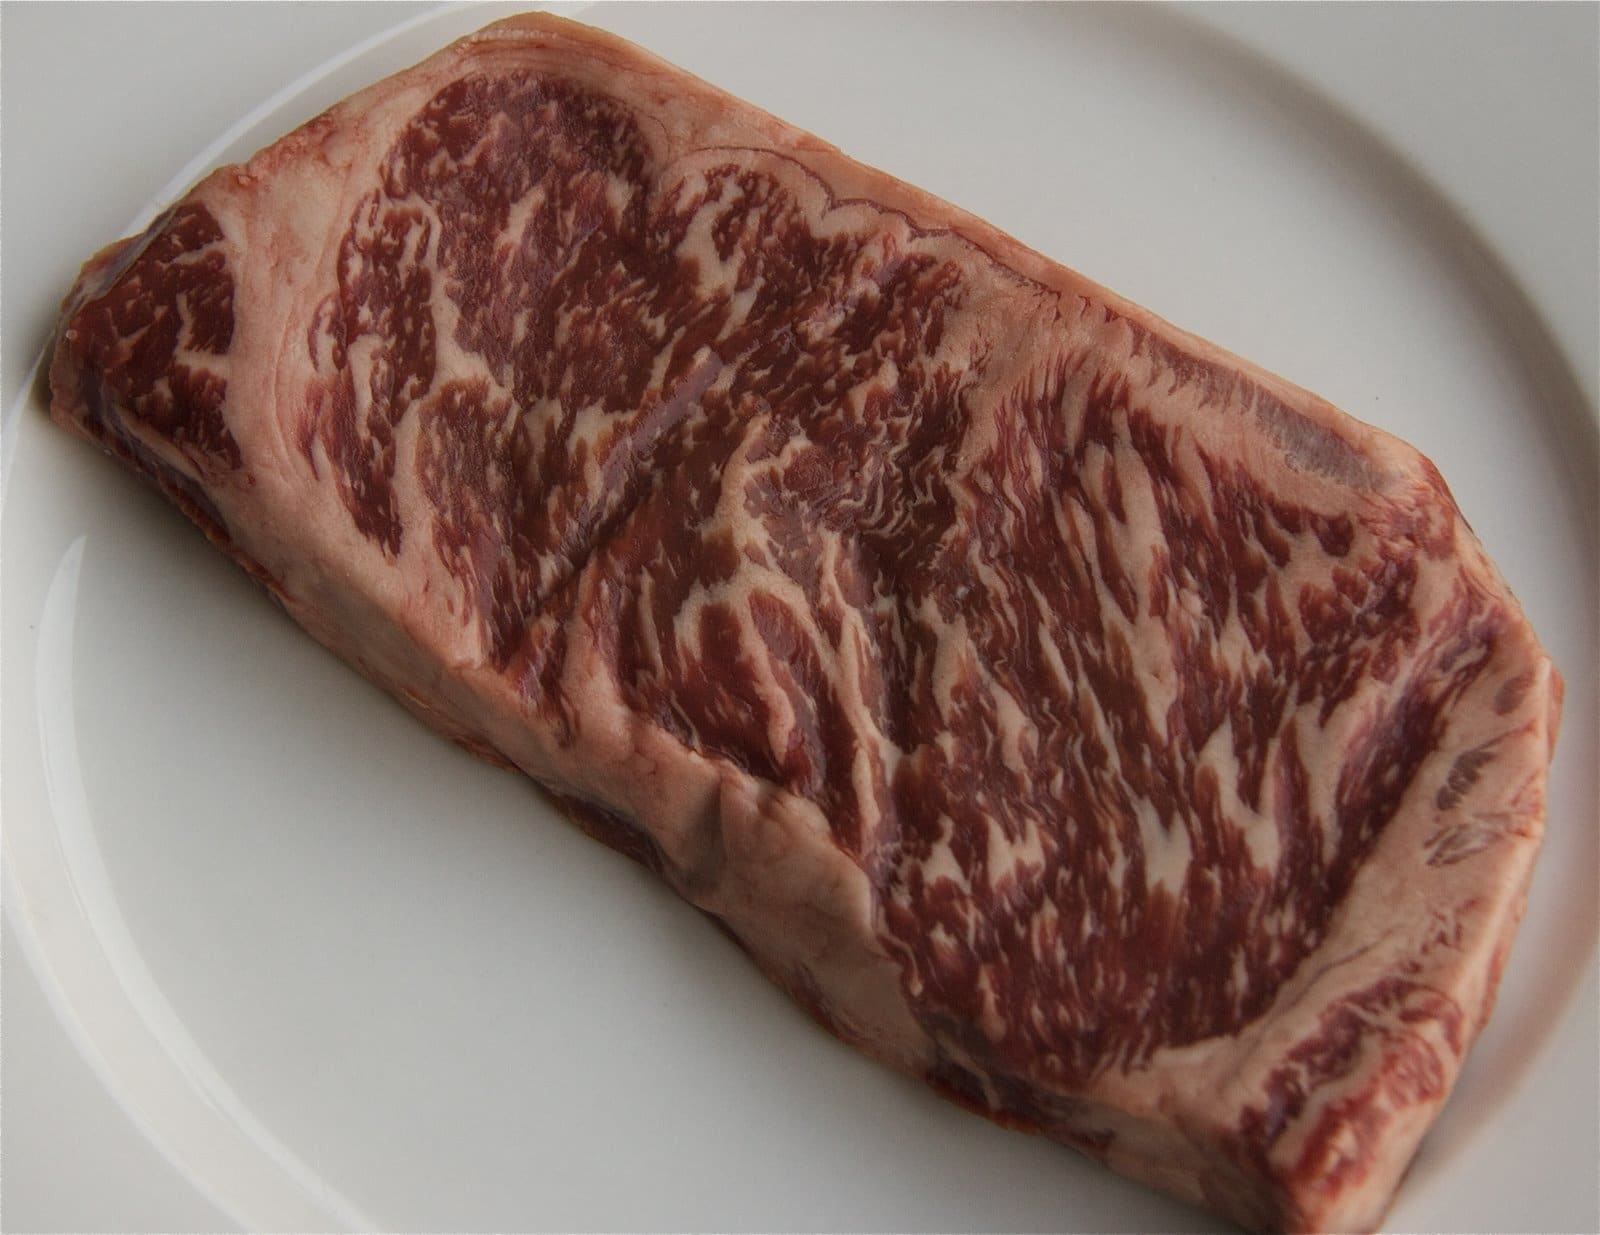 Marbling Score of Wyndford Wagyu Beef Explained: A Mark of Unmatched  Quality - Wyndford Wagyu